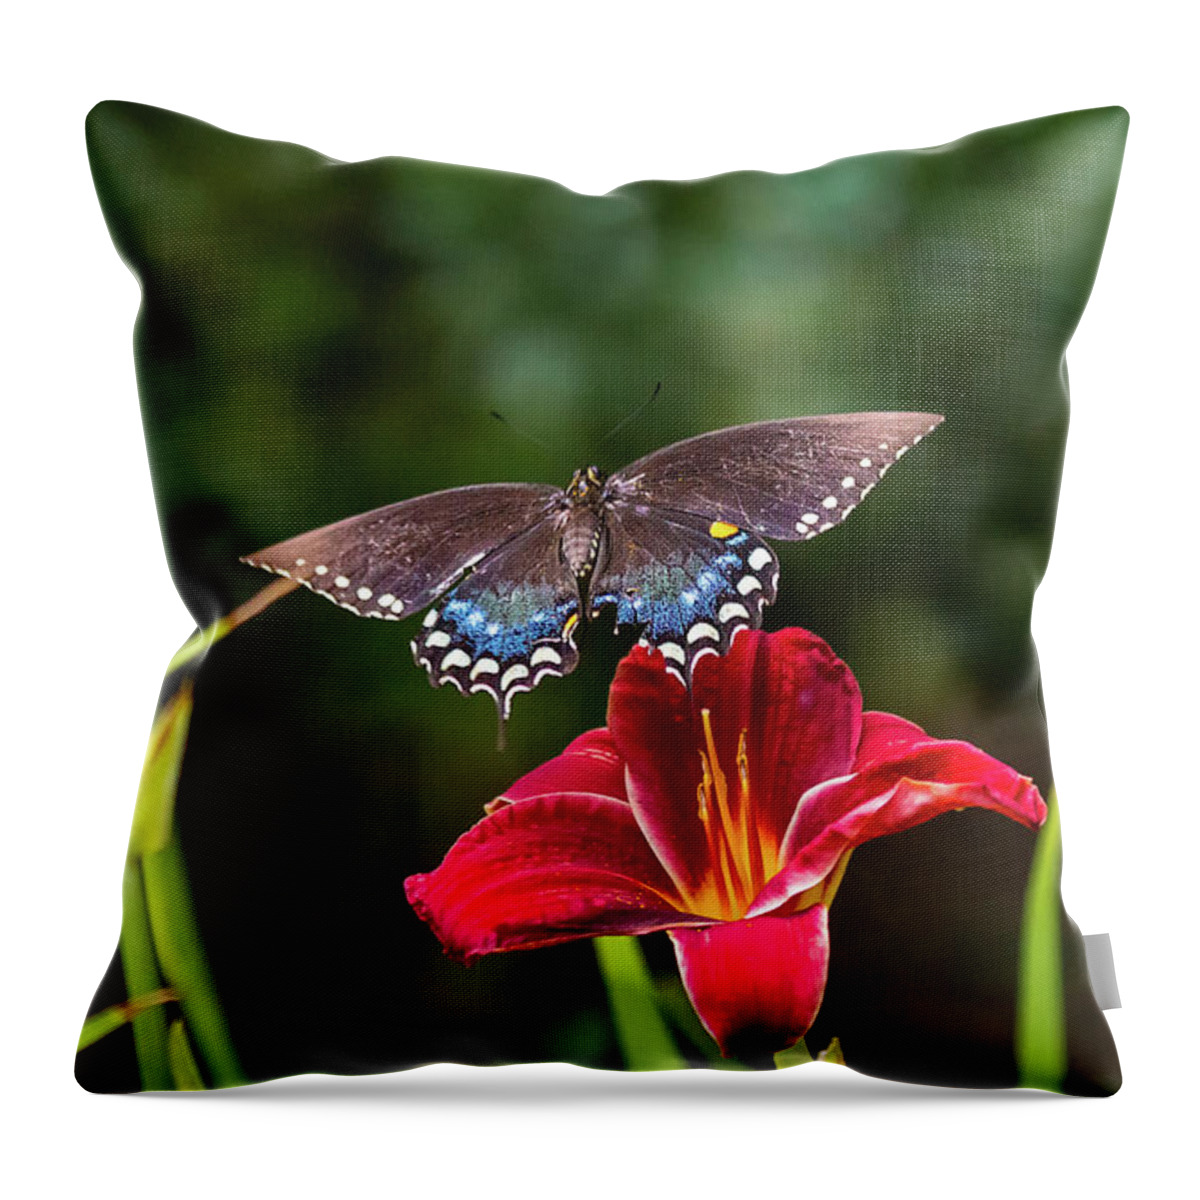 Butterfly Insect Closeup Close Up Close-up Orchid Flower Flowers Botany Botanic Botanical Nature Outside Outdoors Ma Mass Massachusetts Brian Hale Brianhalephoto Wings Flying Flight Mid-air Midair Landing Throw Pillow featuring the photograph Coming in for a Landing by Brian Hale